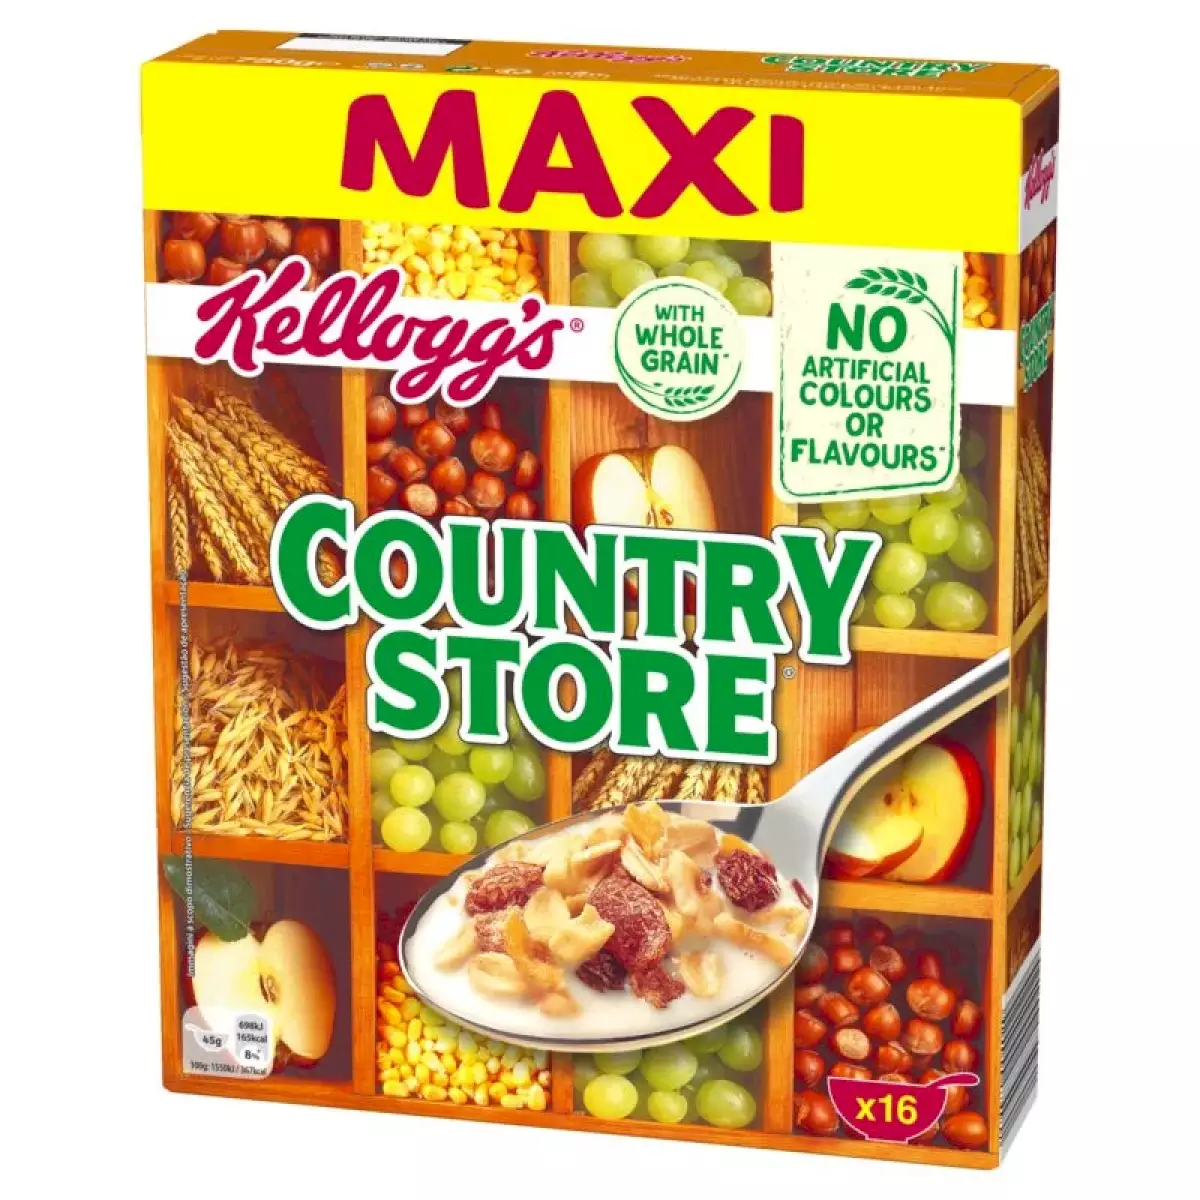 CEREALE COUNTRY STORE PQ 750 GR KELLOGG'S